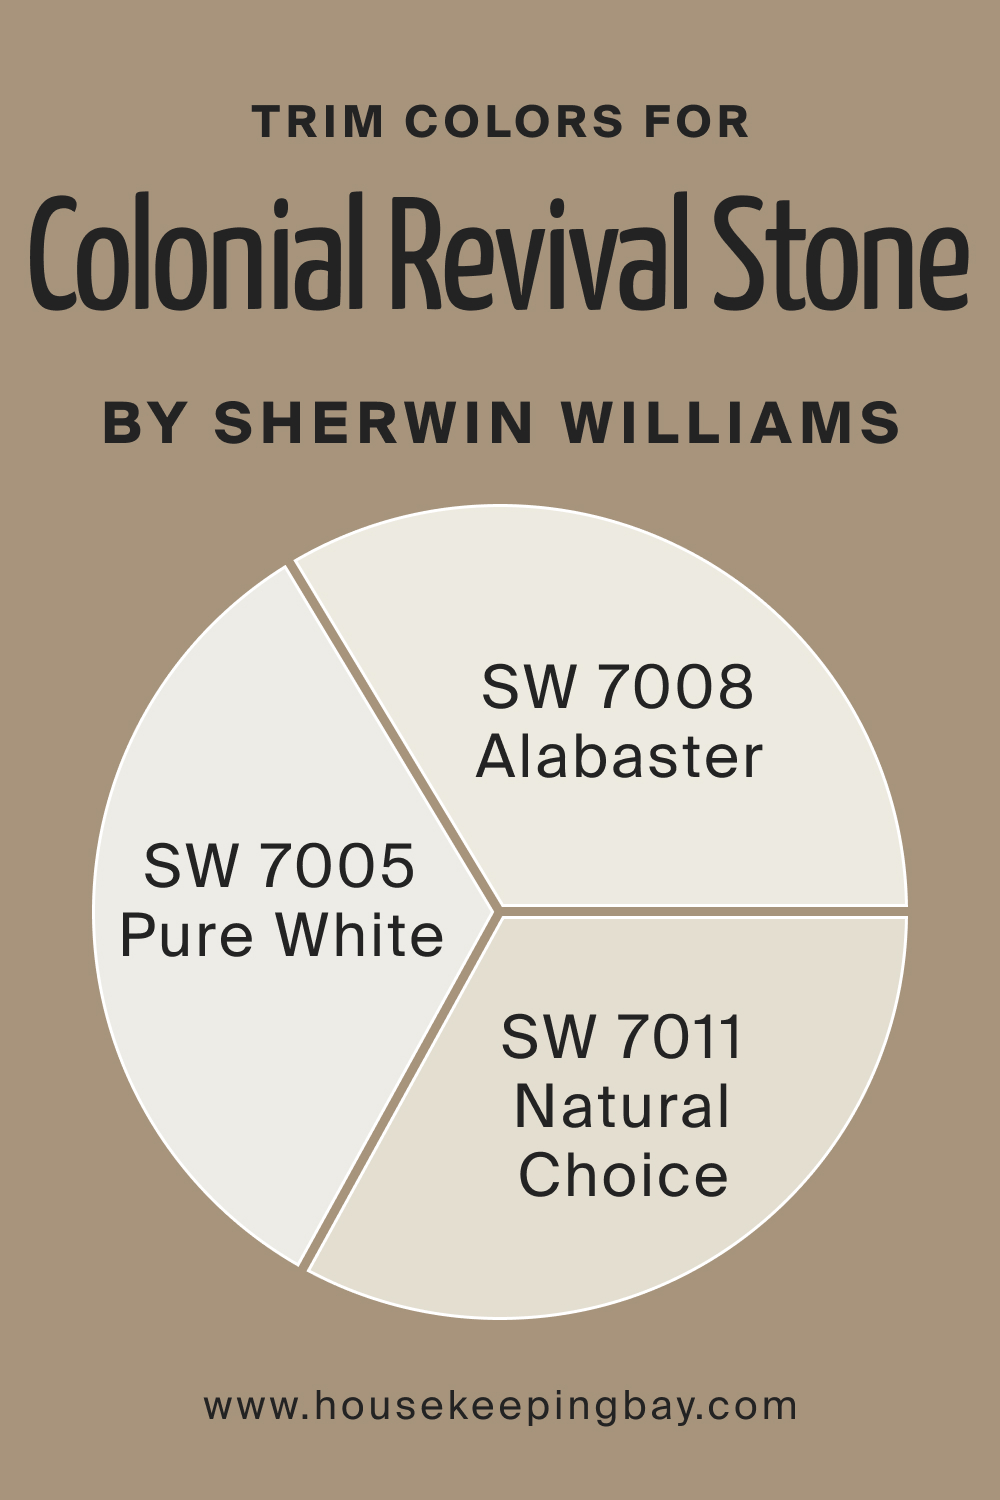 Trim Colors of SW 2827 Colonial Revival Stone by Sherwin Williams